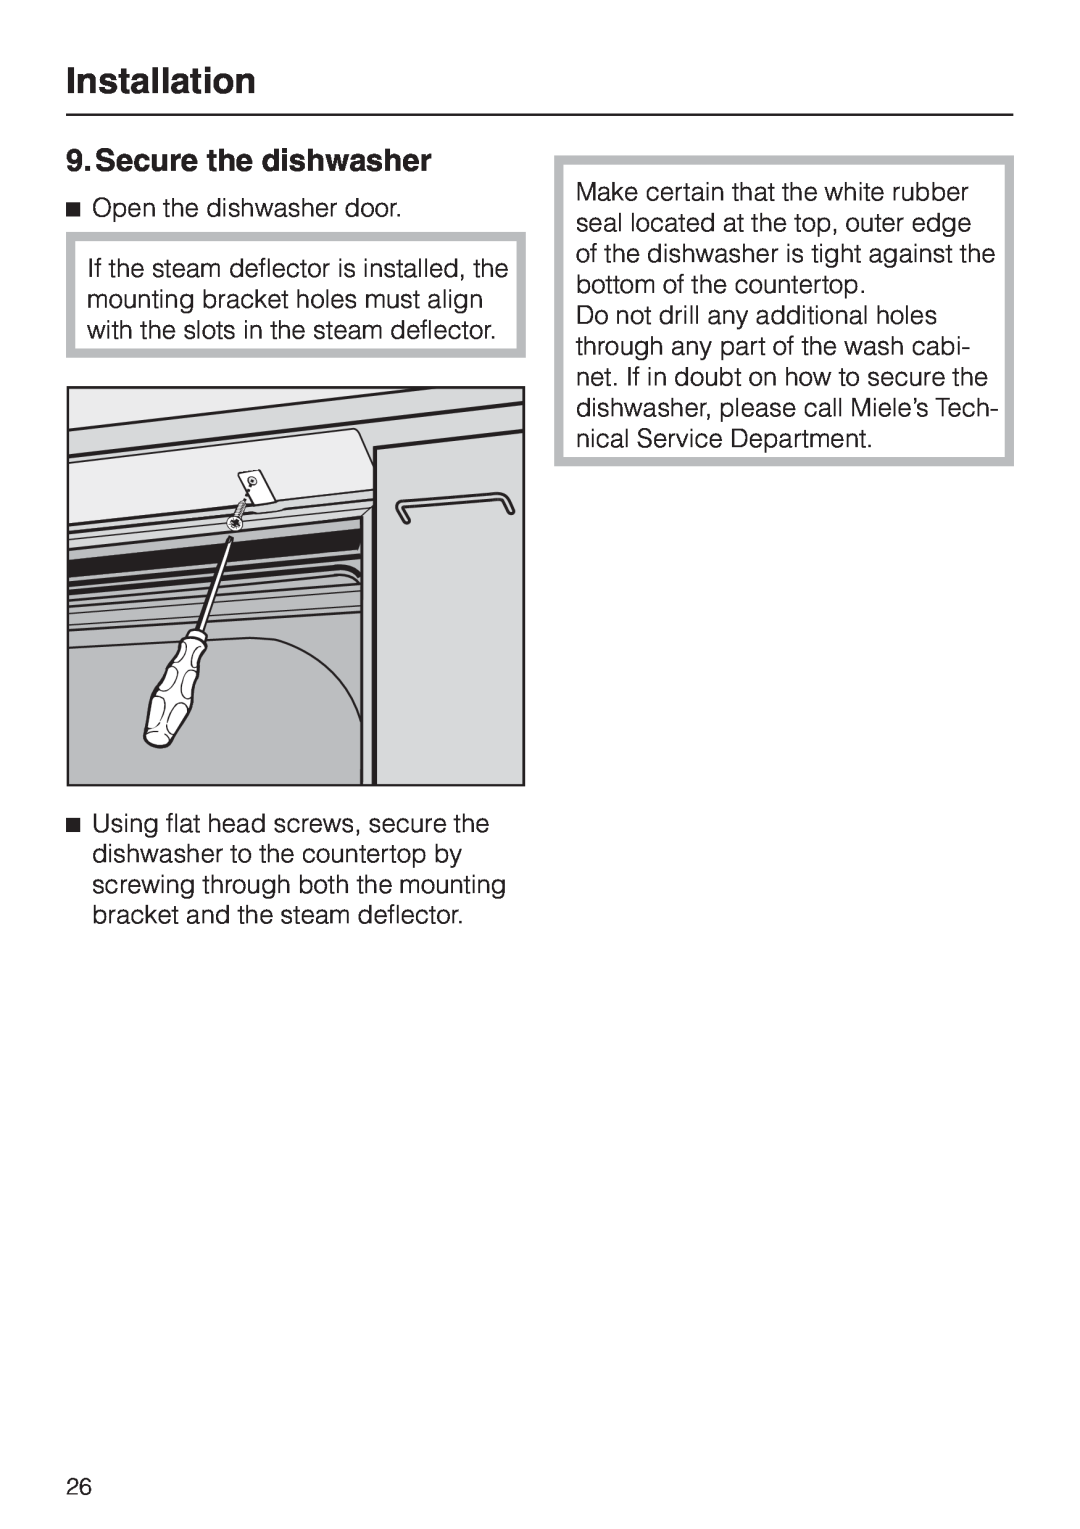 Miele HG02 installation instructions Secure the dishwasher, Installation 